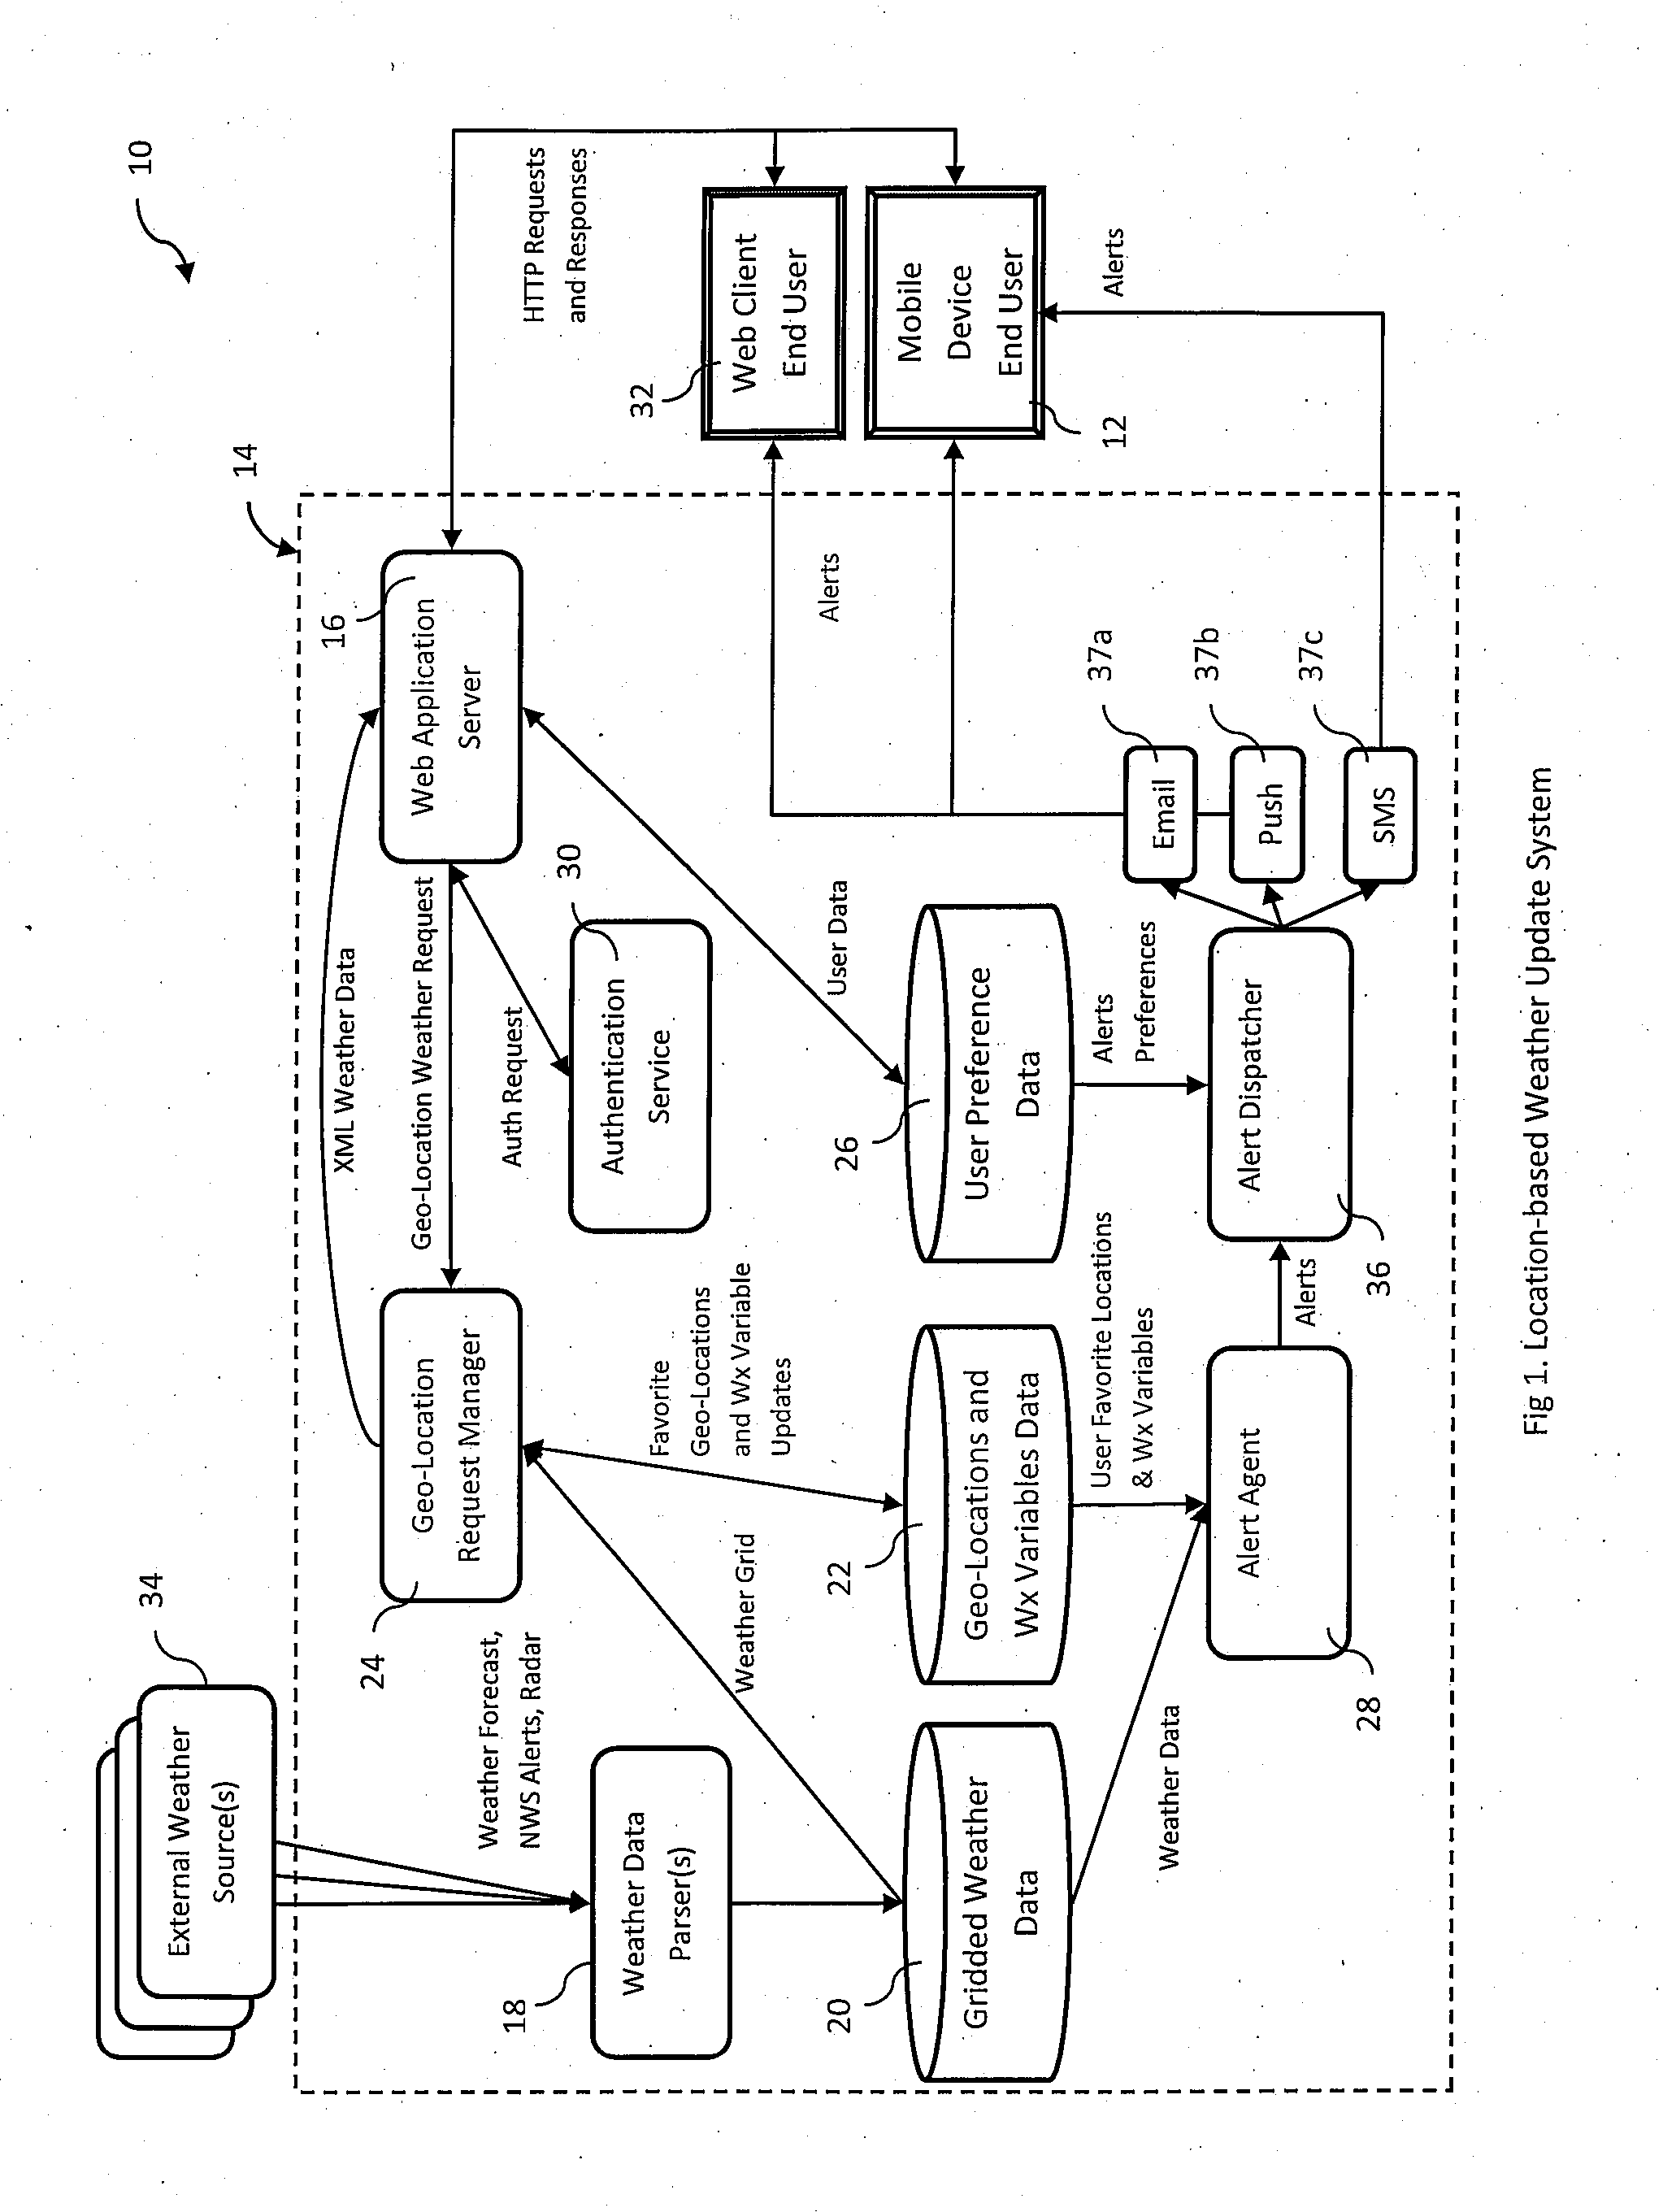 Location-based weather update system, method, and device